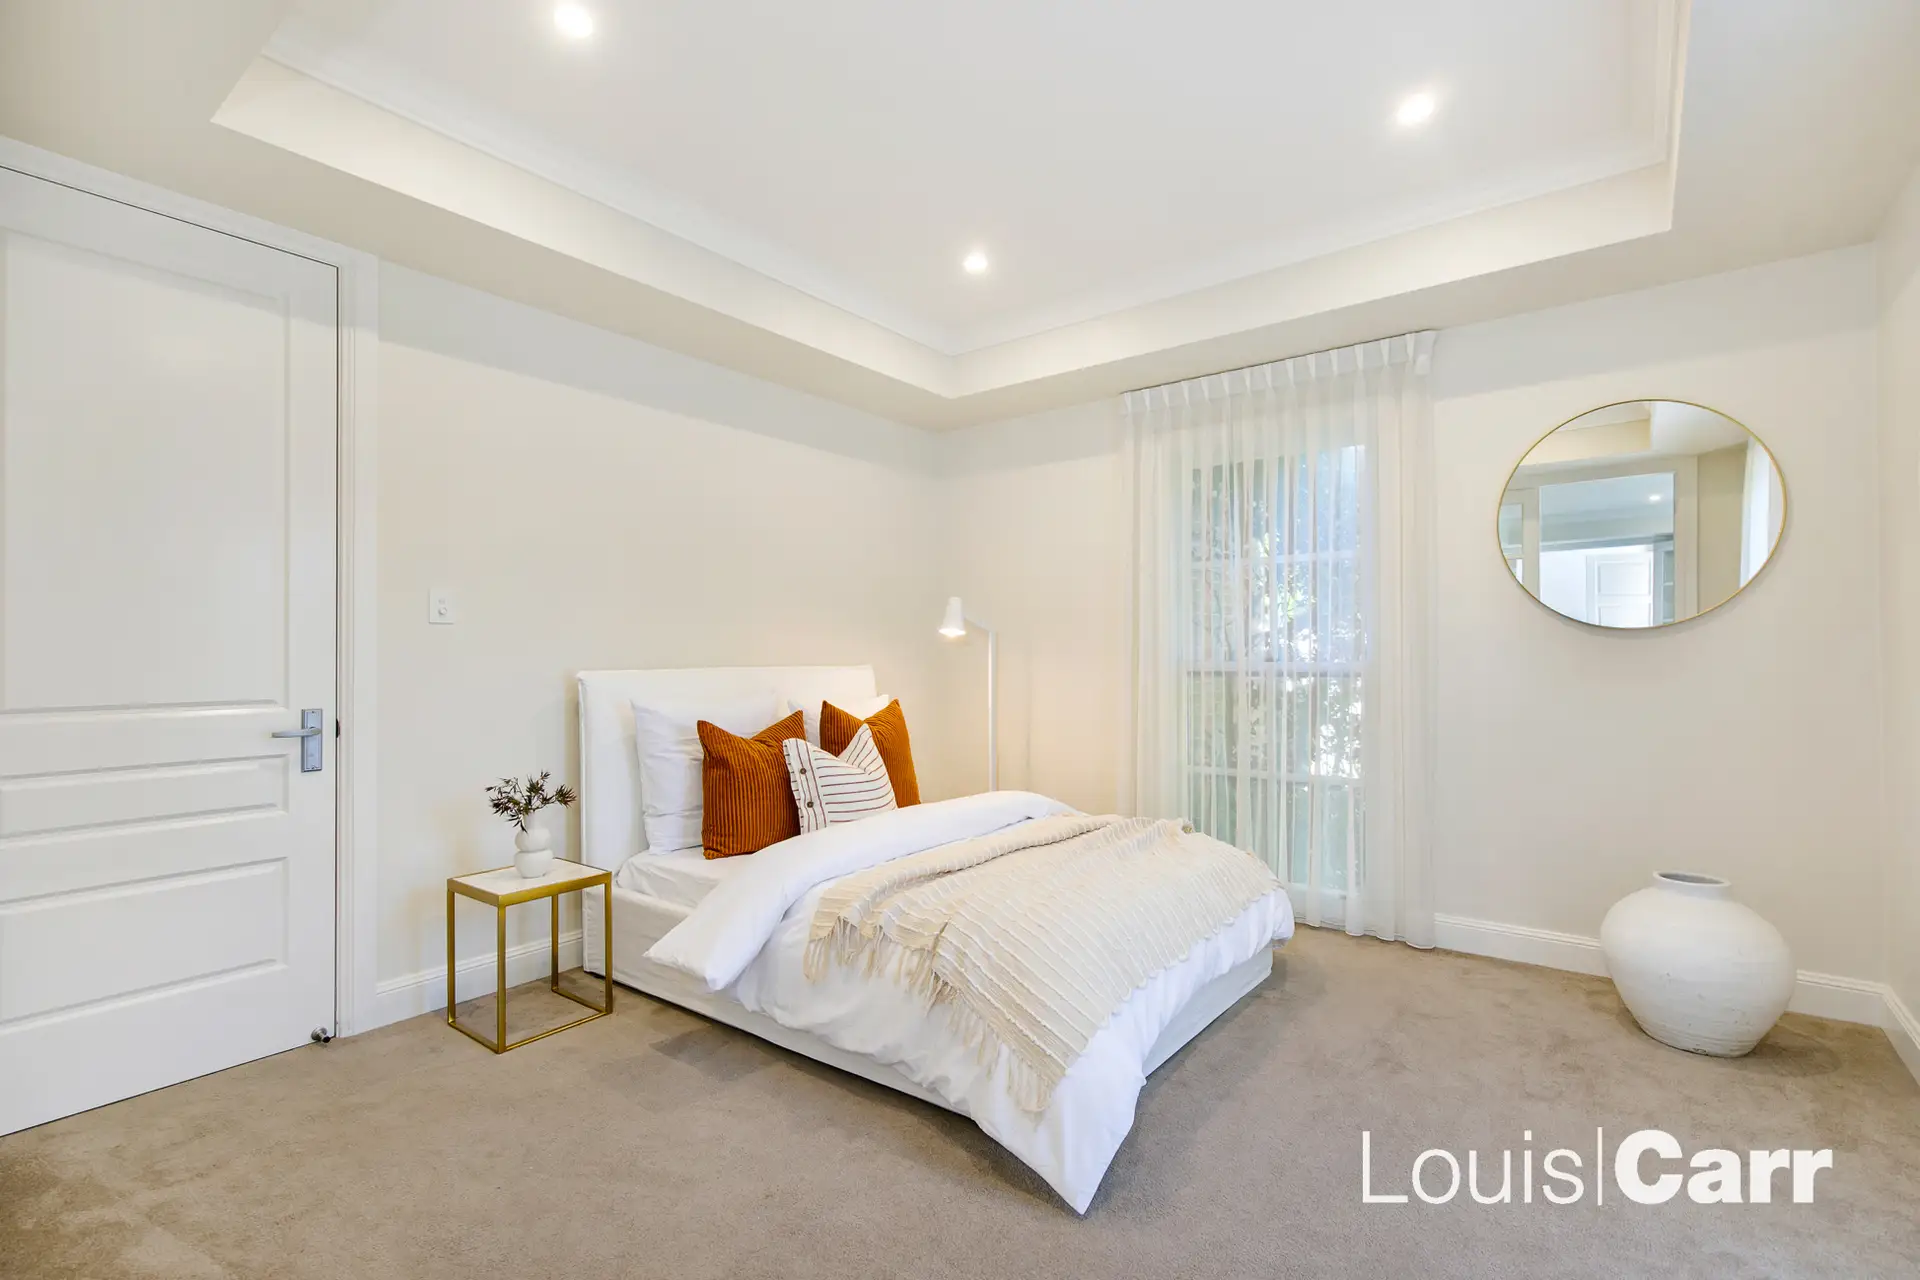 Photo #13: 23 Doris Hirst Place, West Pennant Hills - Sold by Louis Carr Real Estate